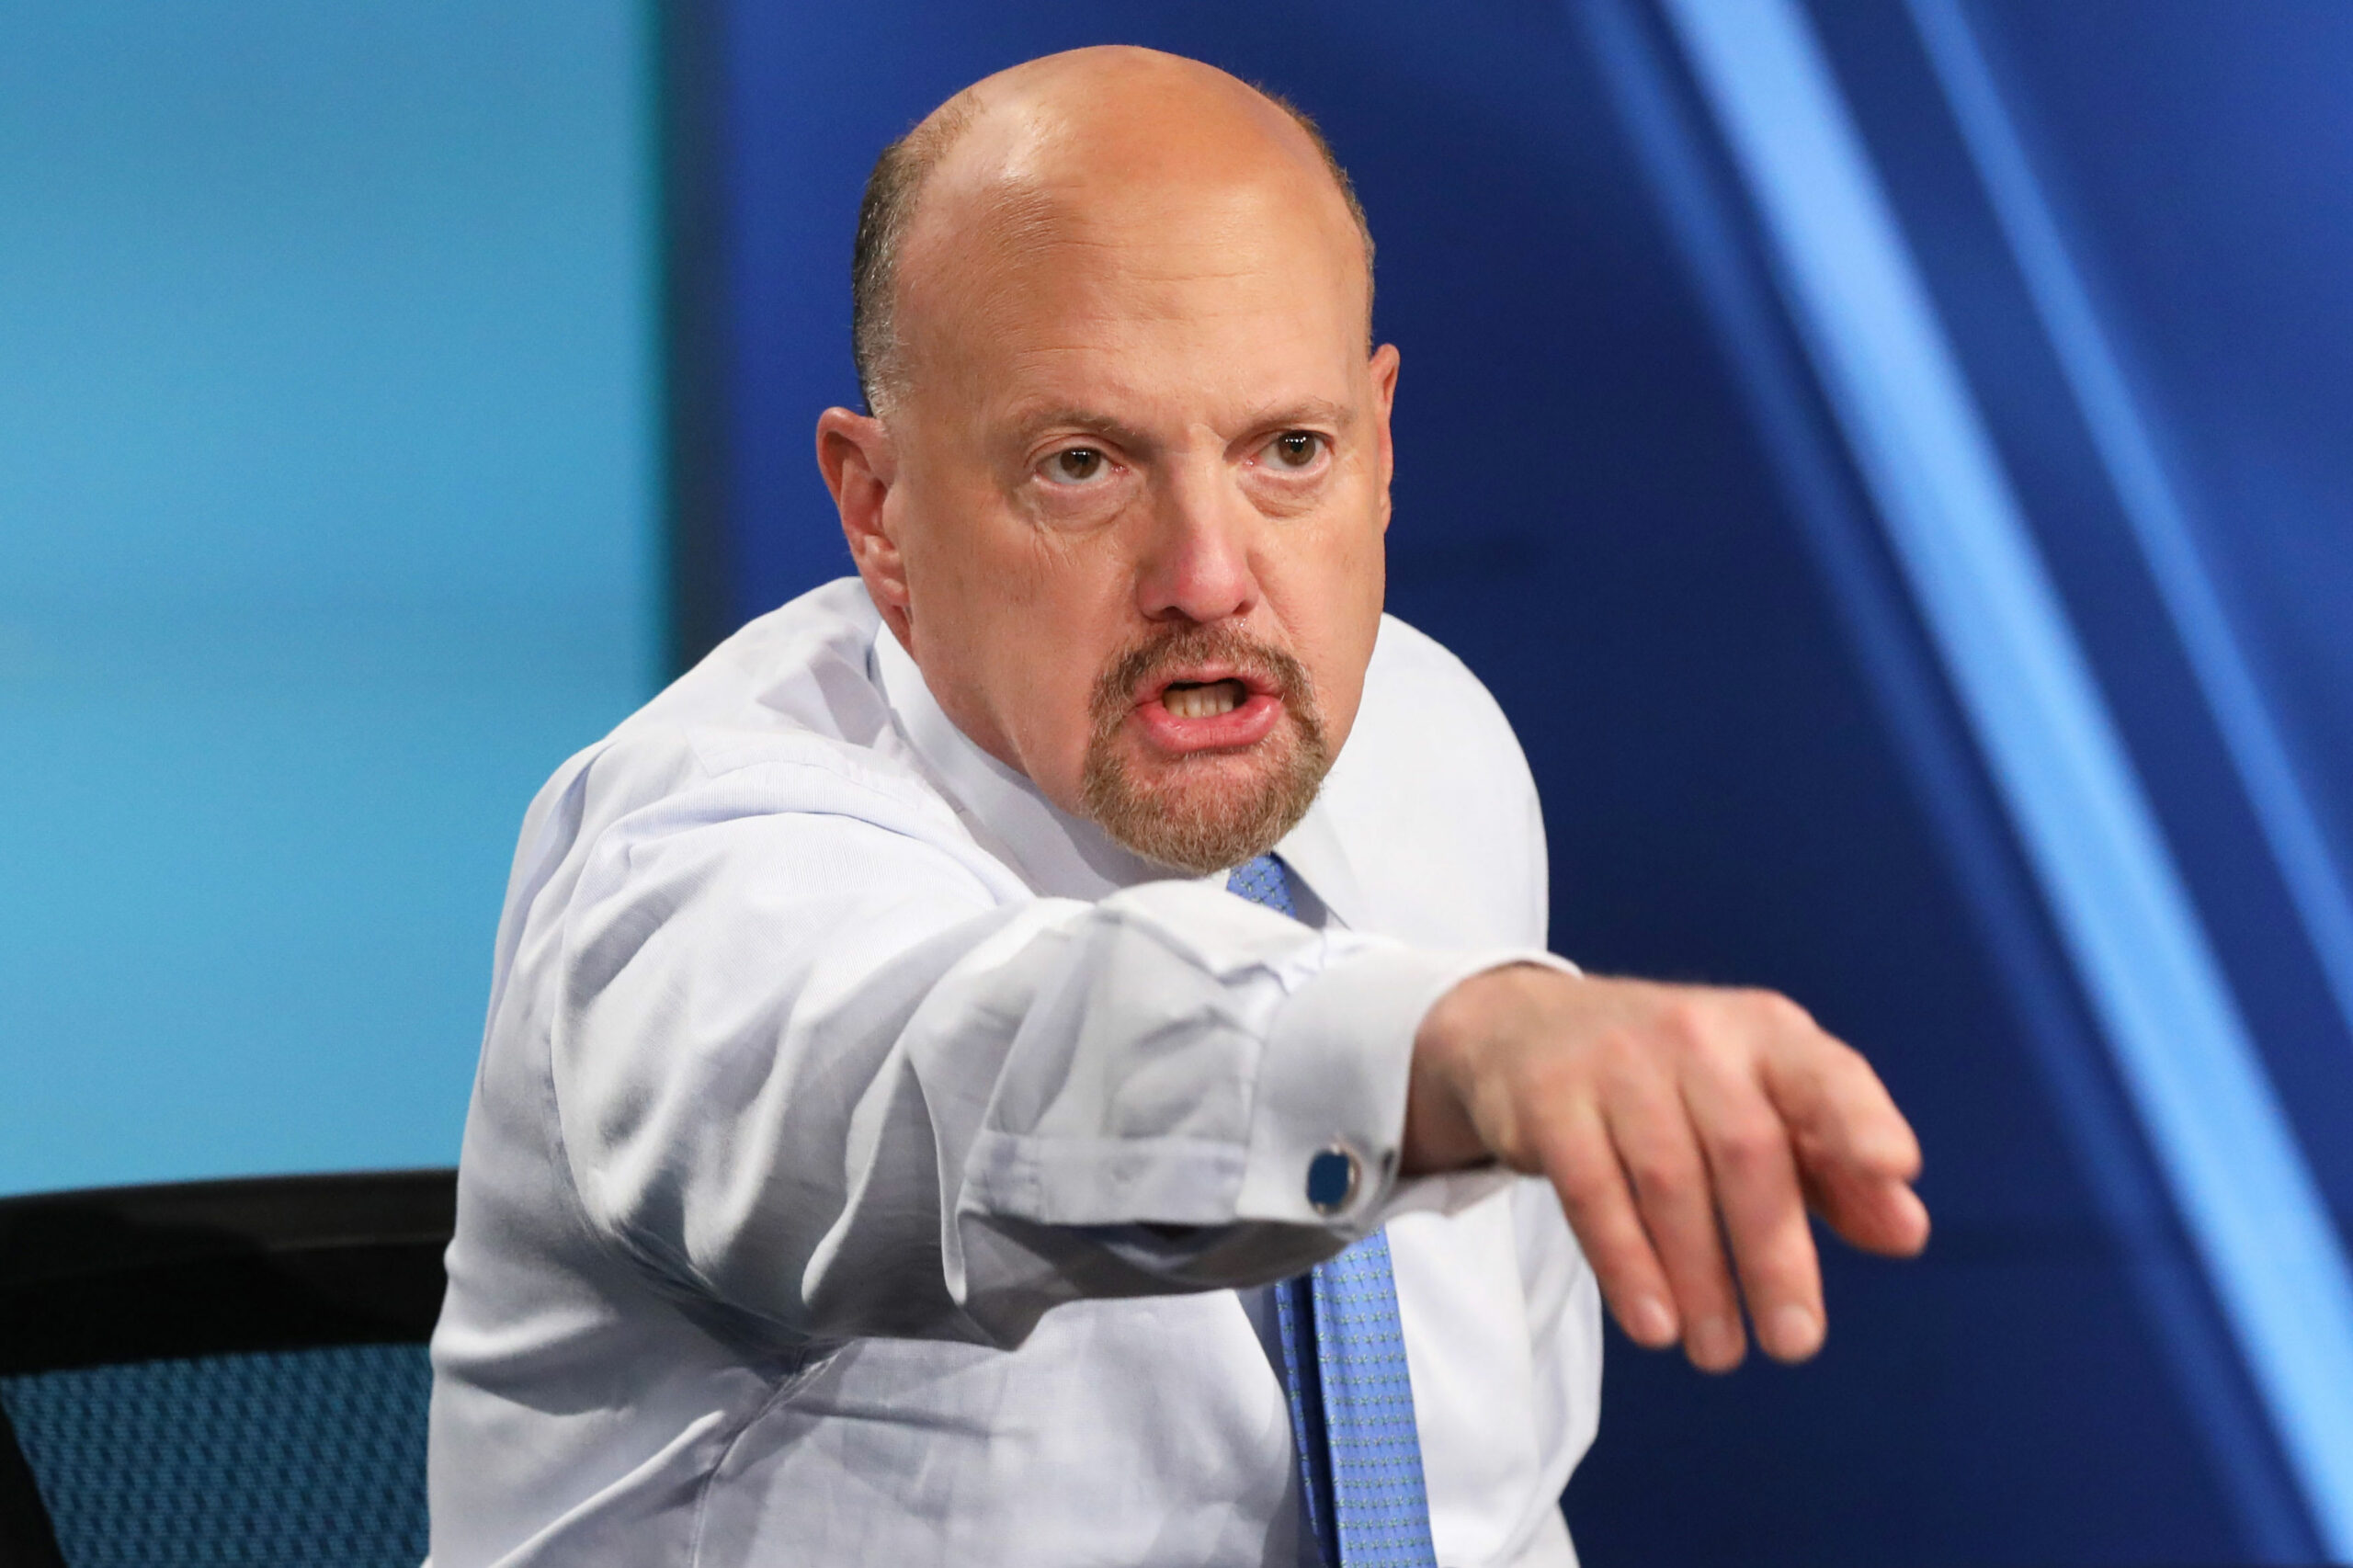 Cramer says market moves are 'crazy' but 'please just stop comparing it to 1999'